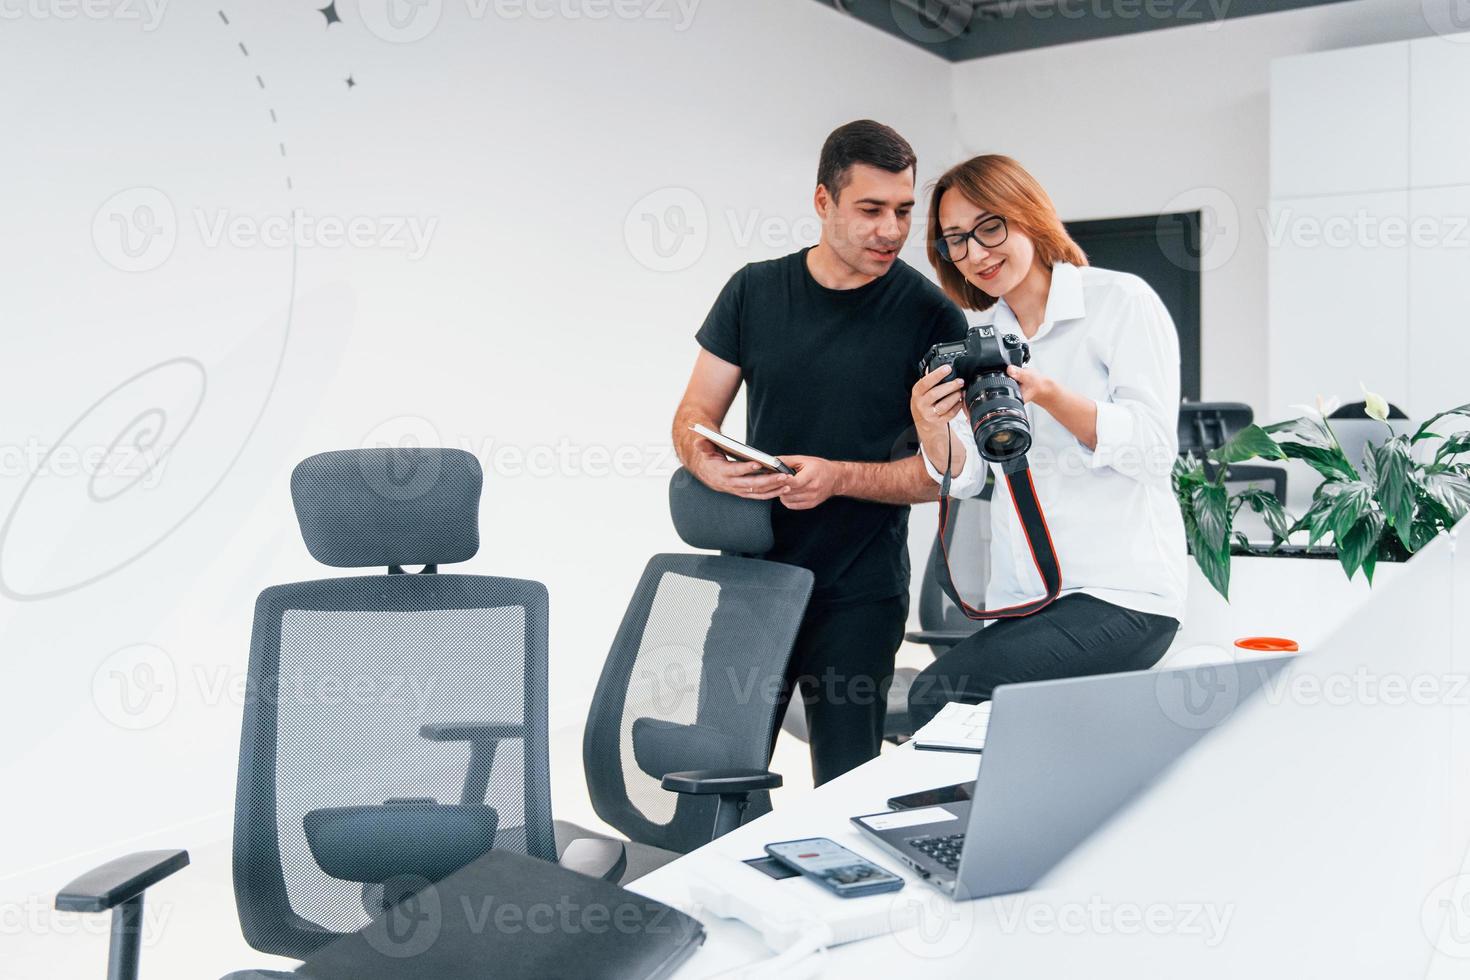 Man in black clothes watching photos on the female's photographer camera